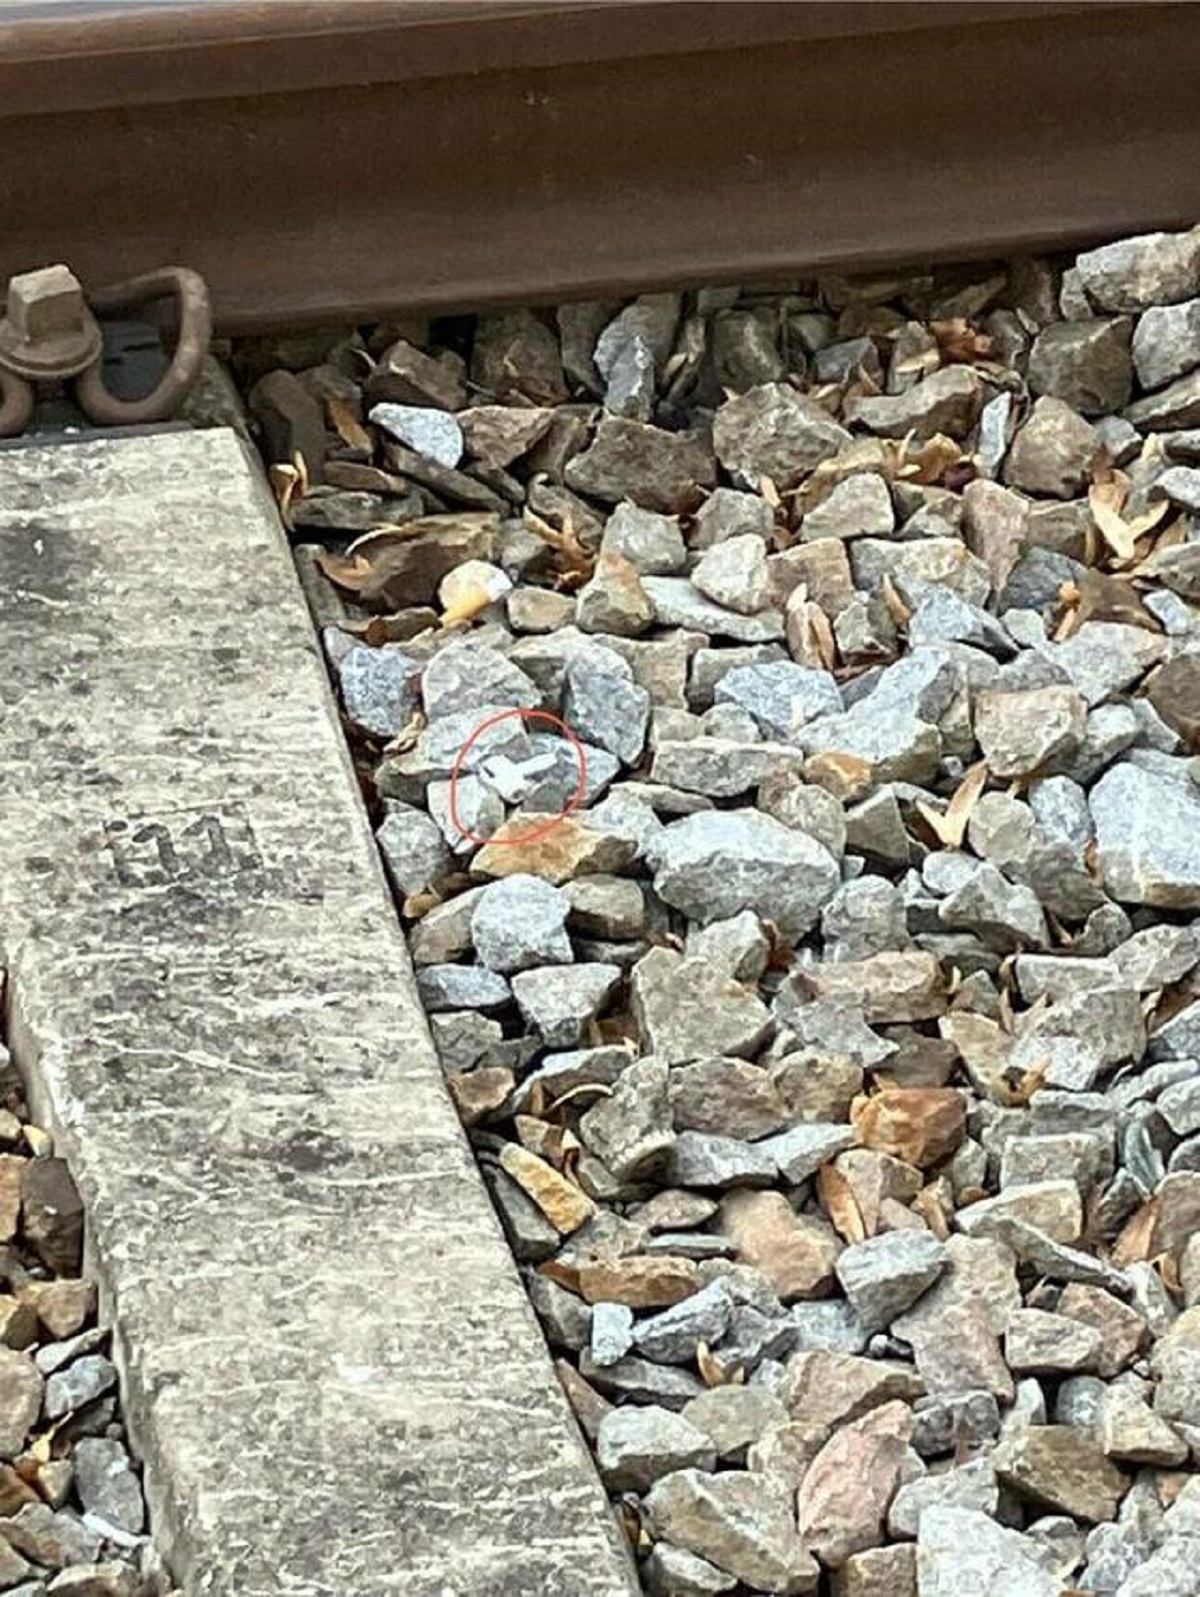 "Someone lost their Airpod on the rail"